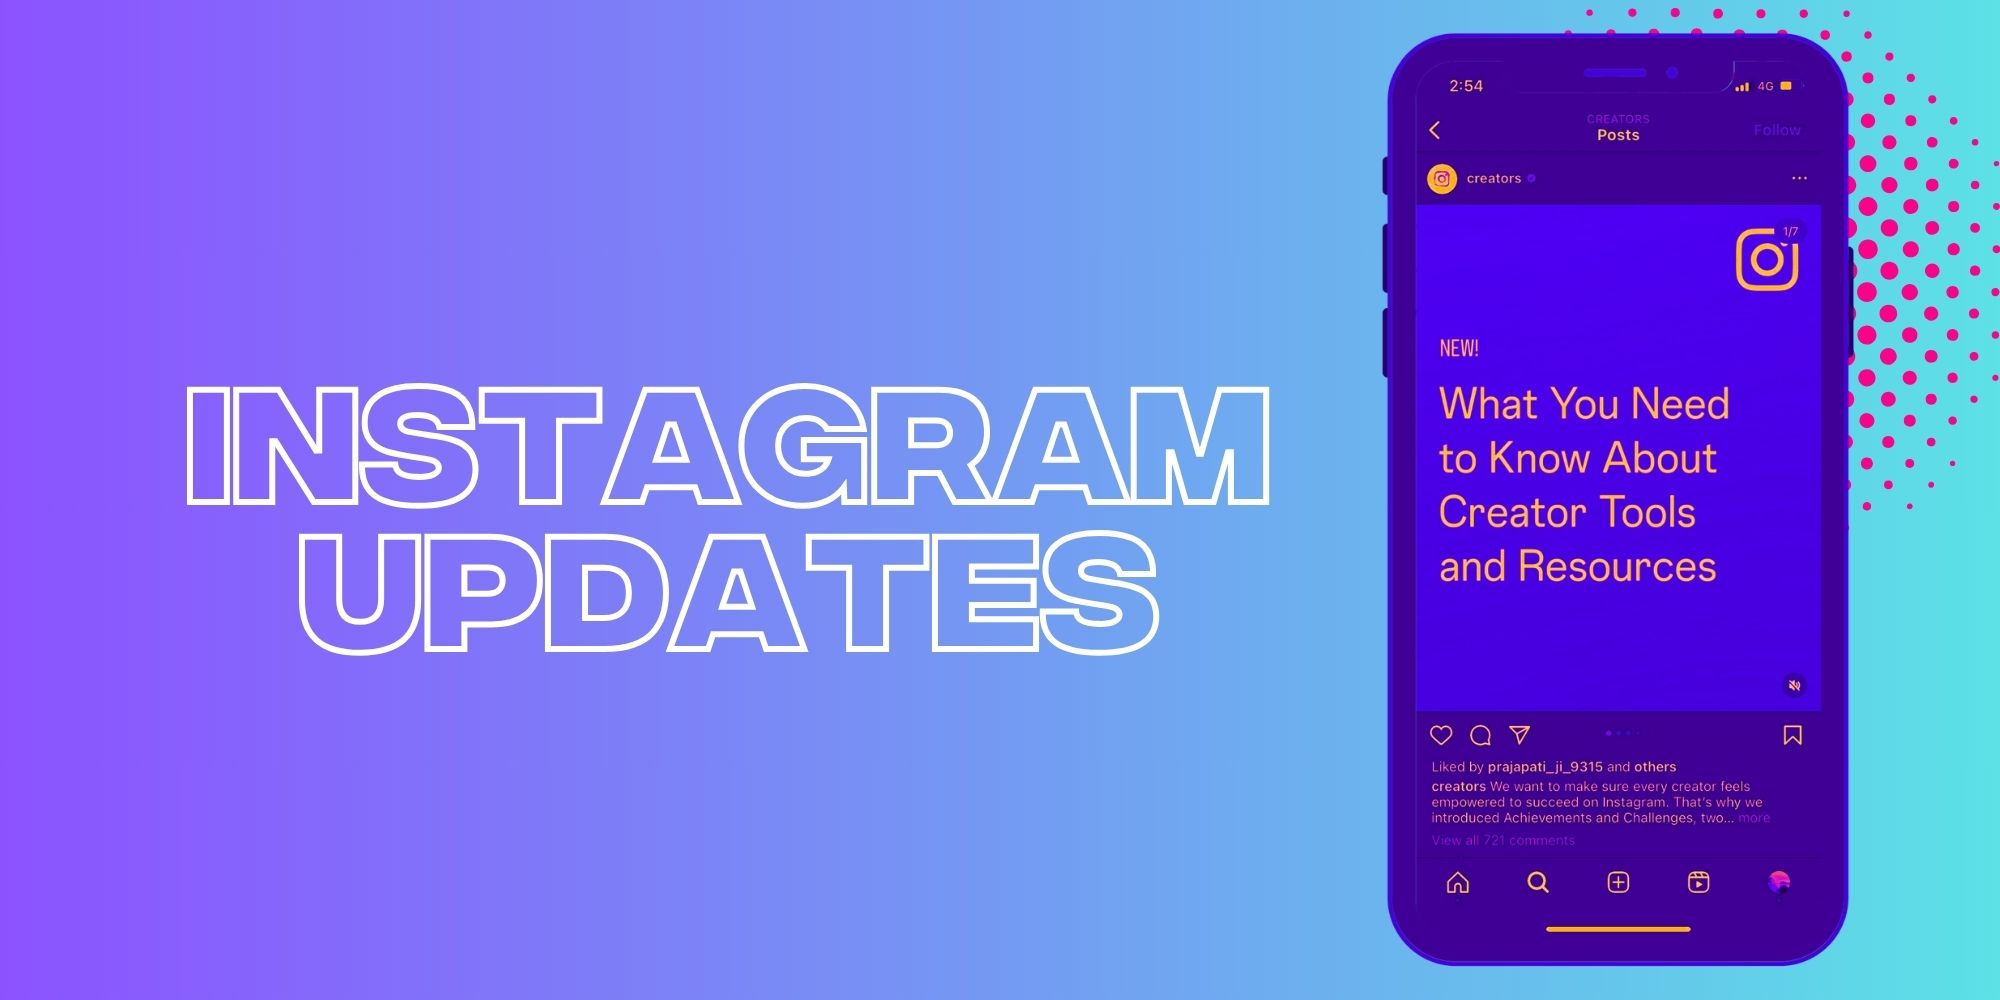 Cutting Through The Nonsense: The New Instagram Updates You Need to Know